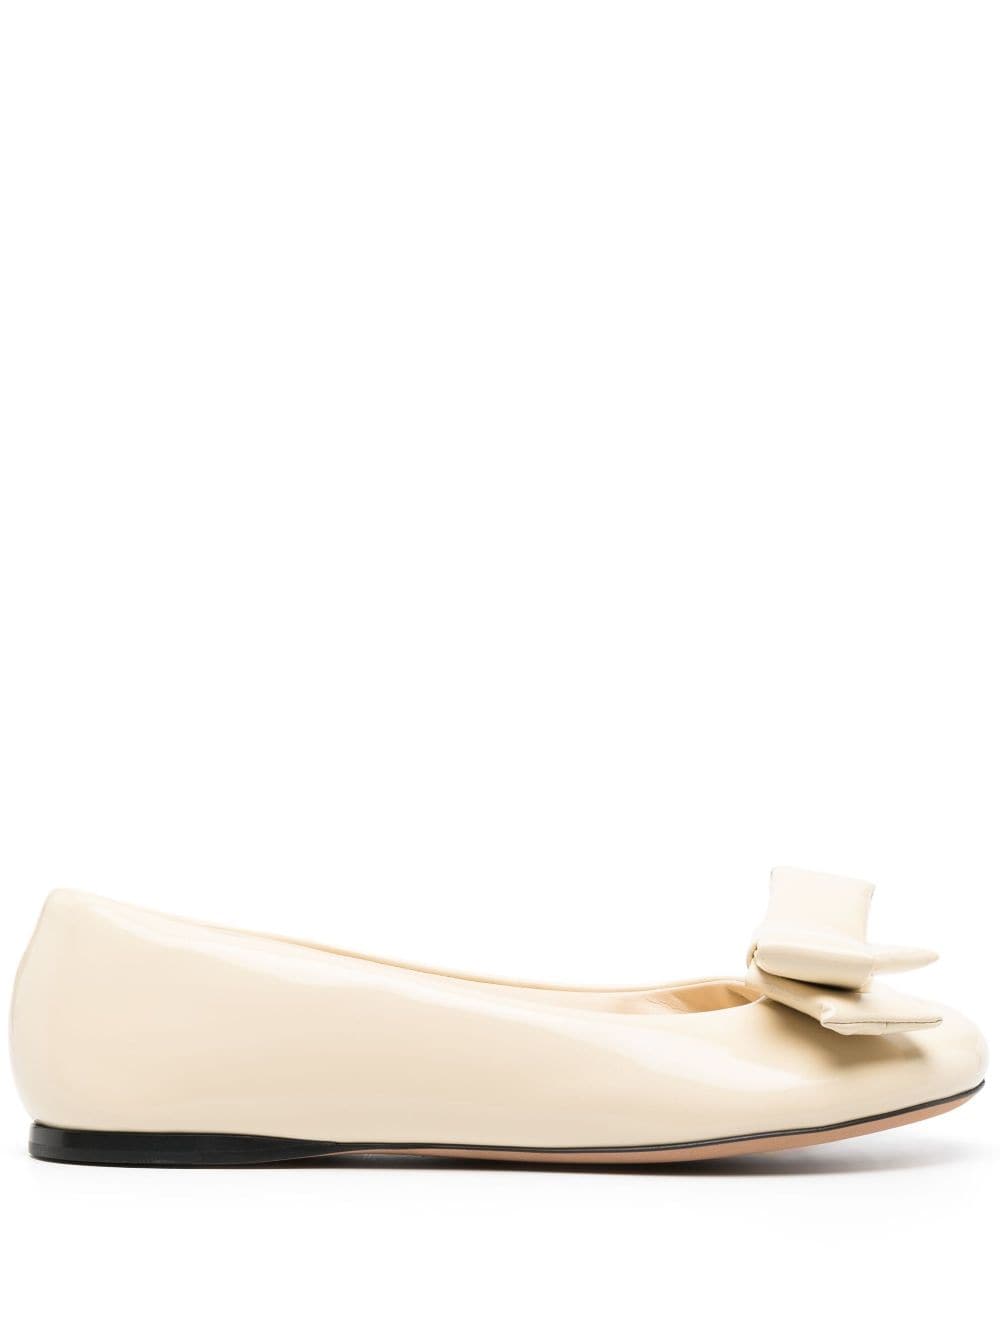 LOEWE Puffy leather ballerina shoes Neutrals